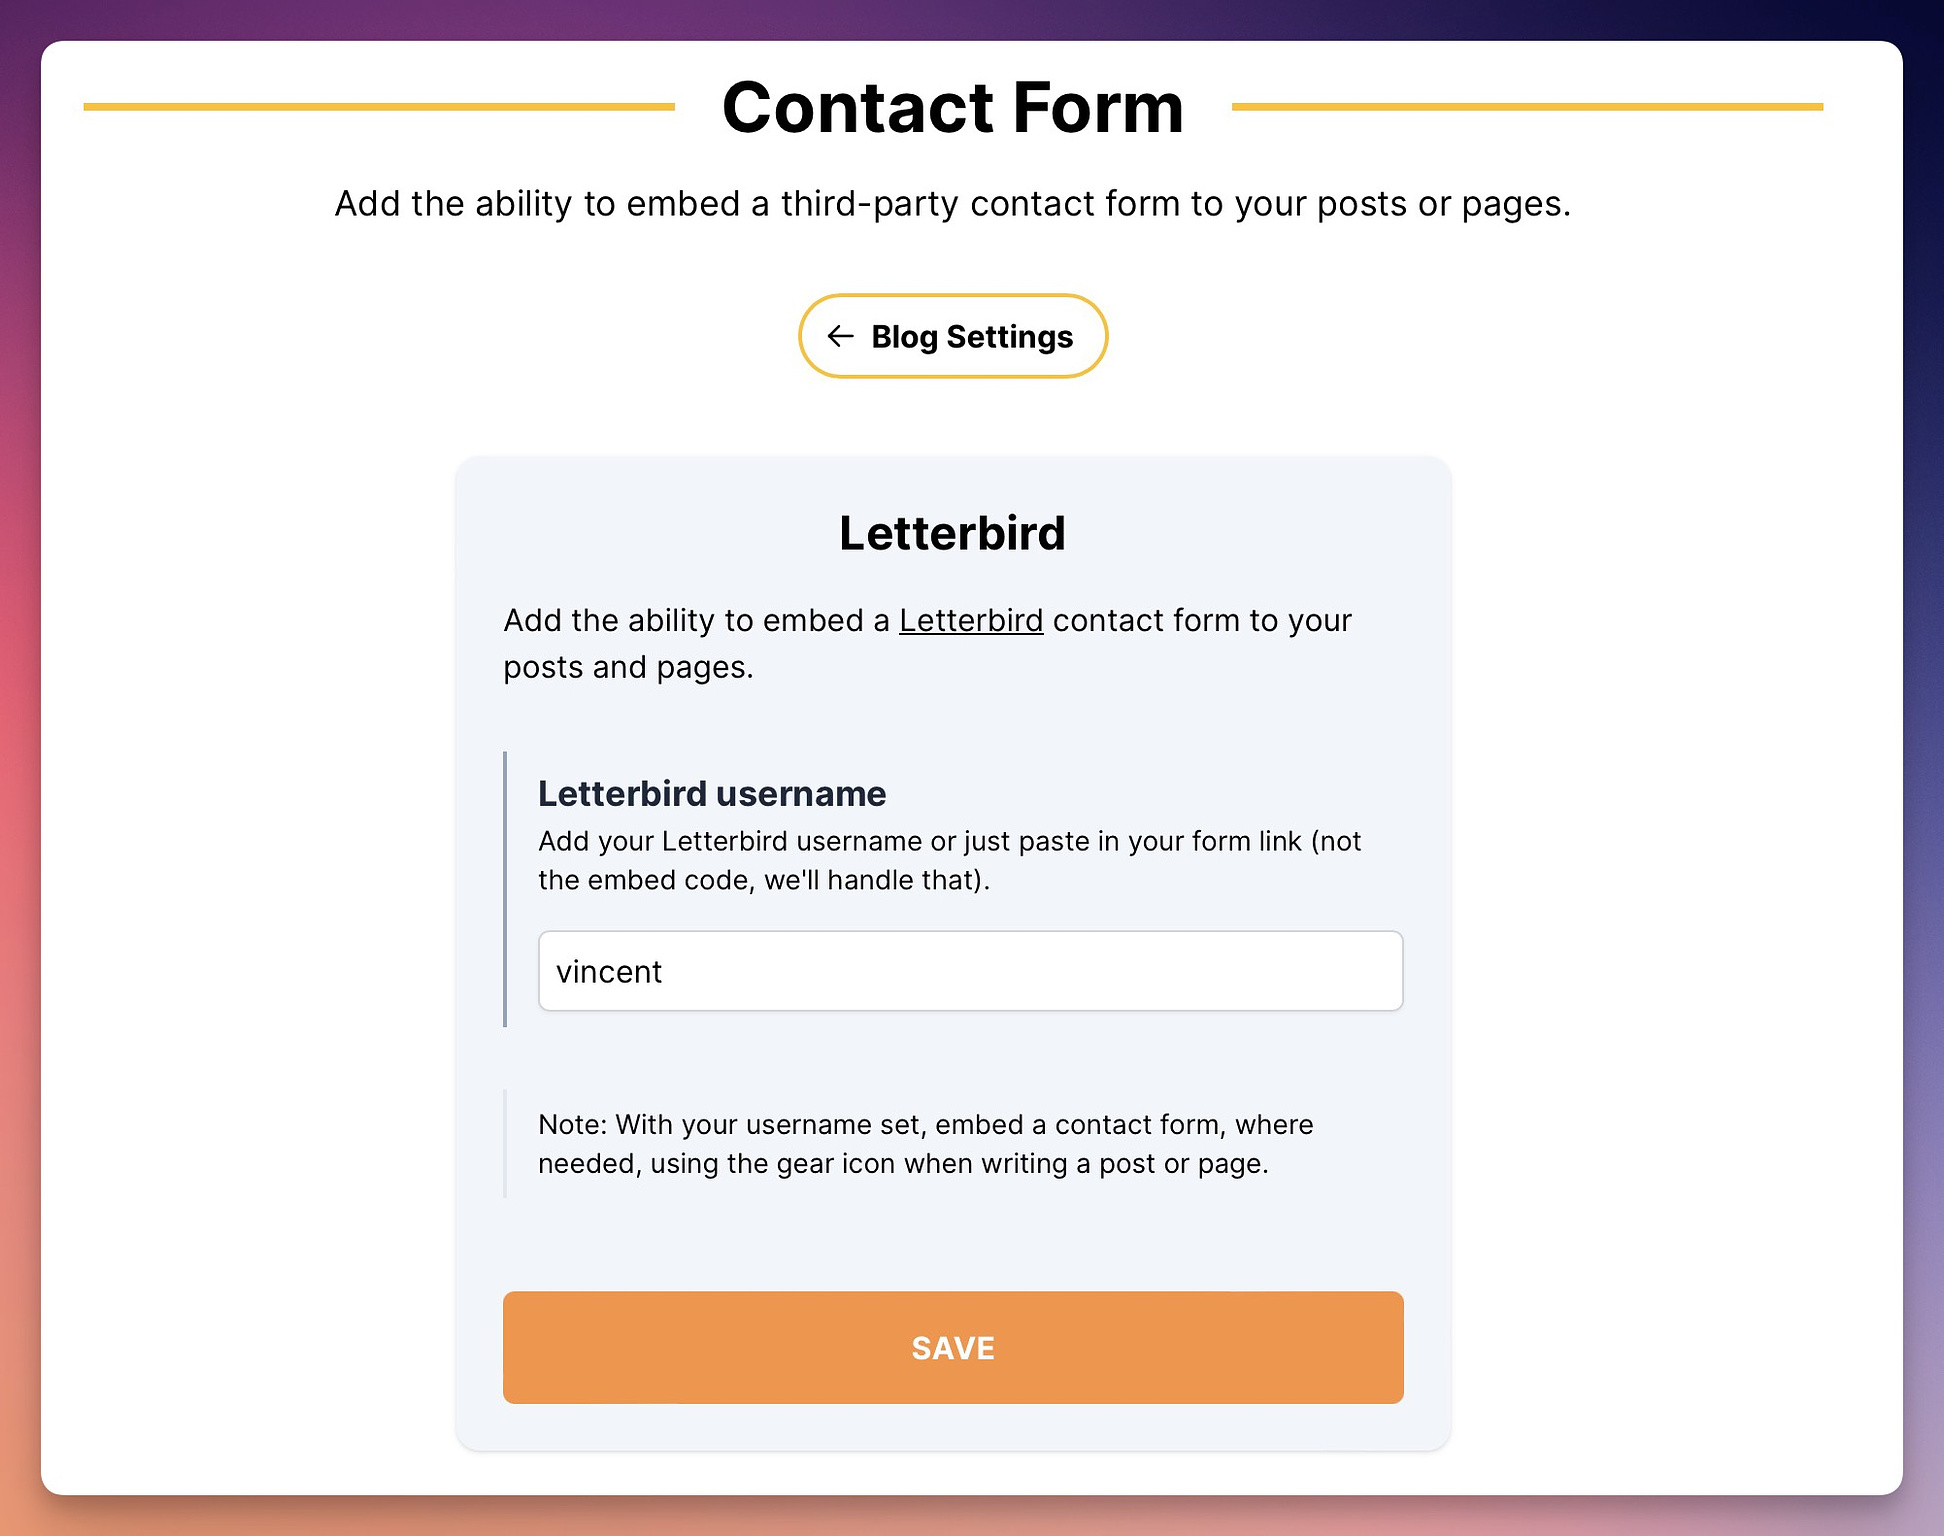 Contact Form settings page allowing you to add your letterbird username.